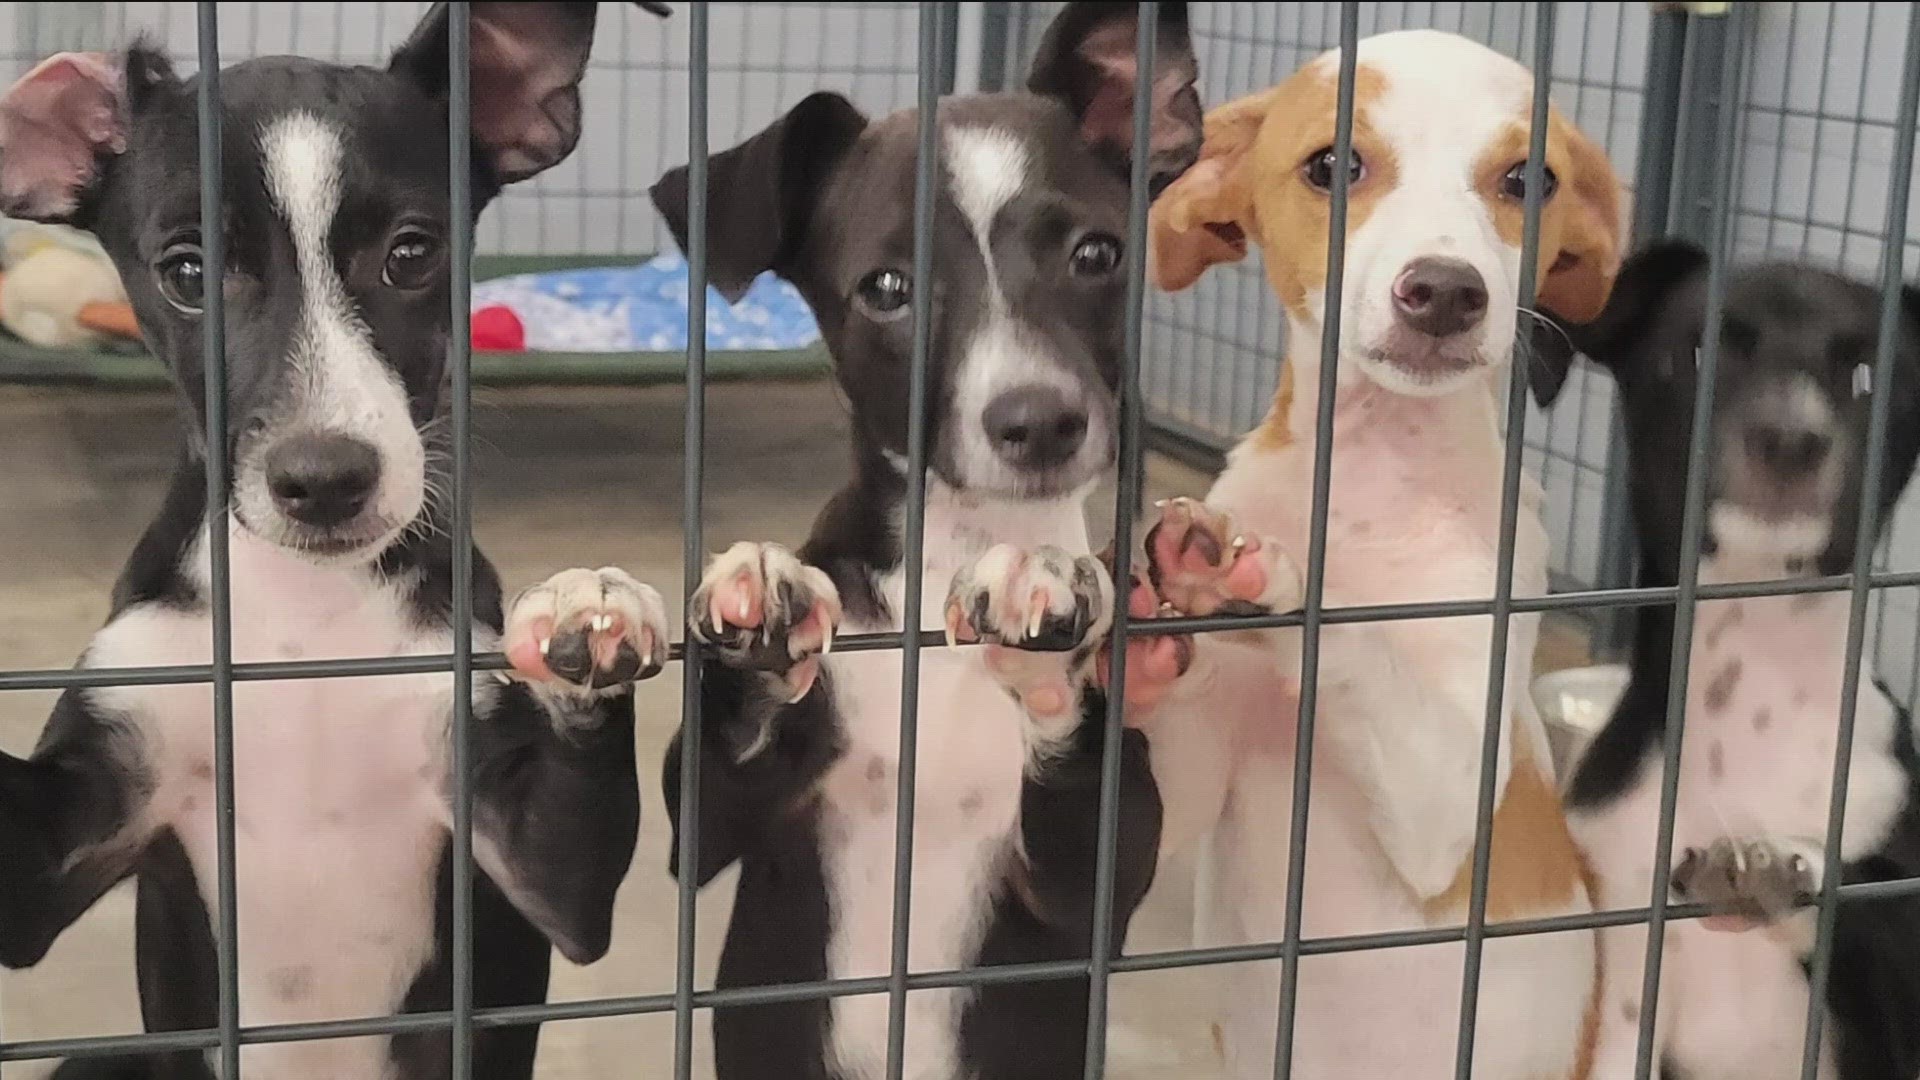 In addition to helping the pets find homes on the mainland, the move will also free up shelter space in the hard-pressed Hawaiian animal shelters.